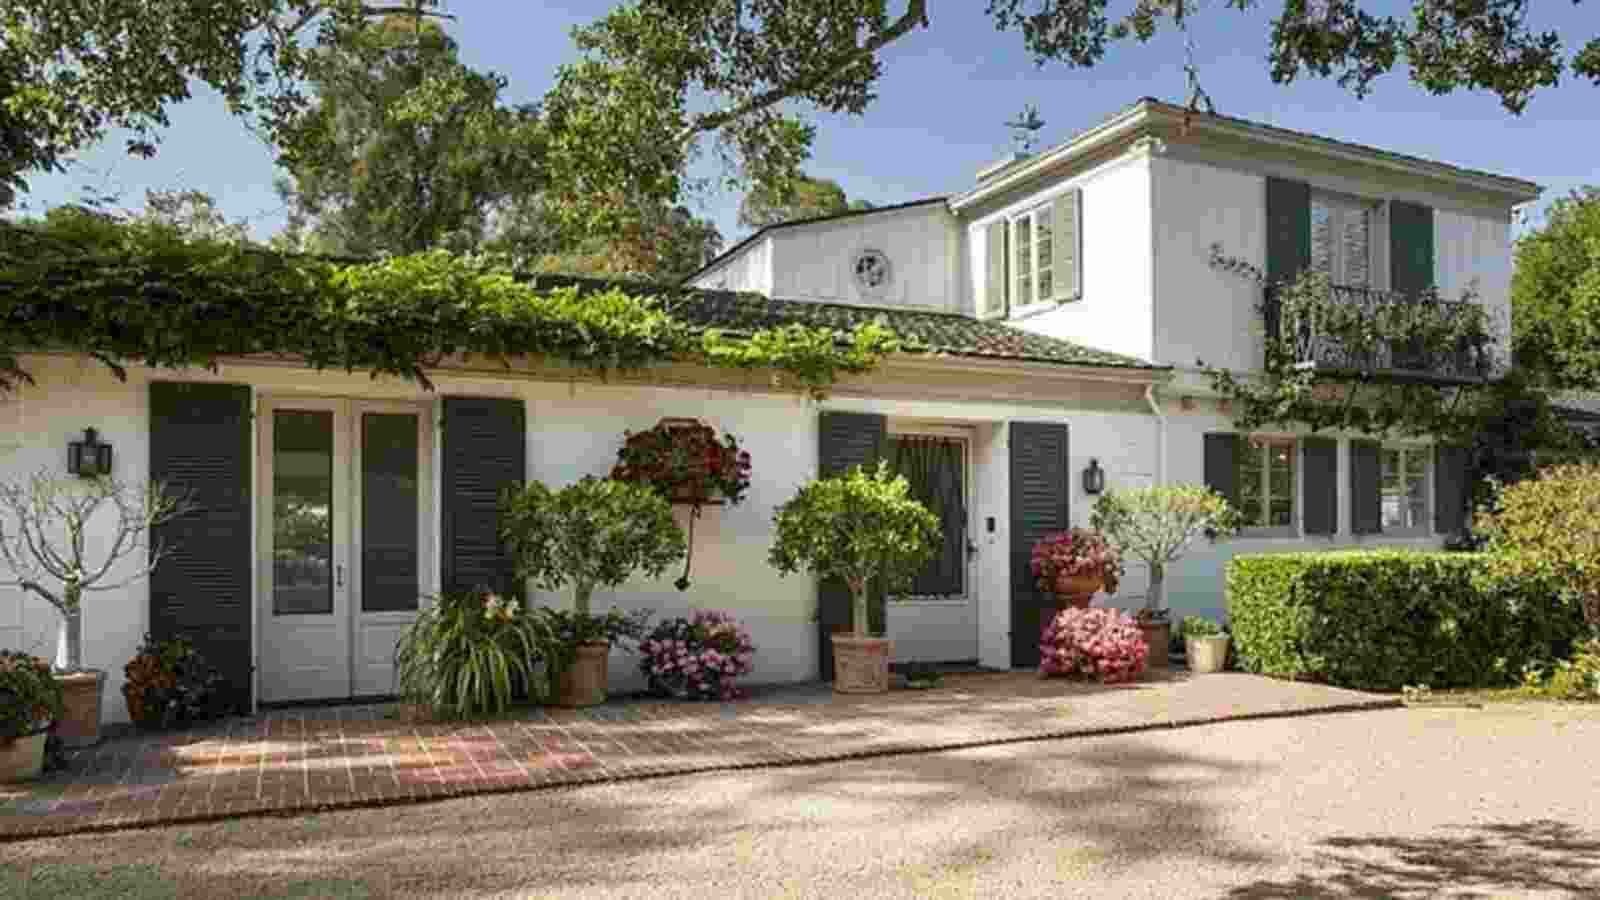 How much real estate does Drew Barrymore owns?